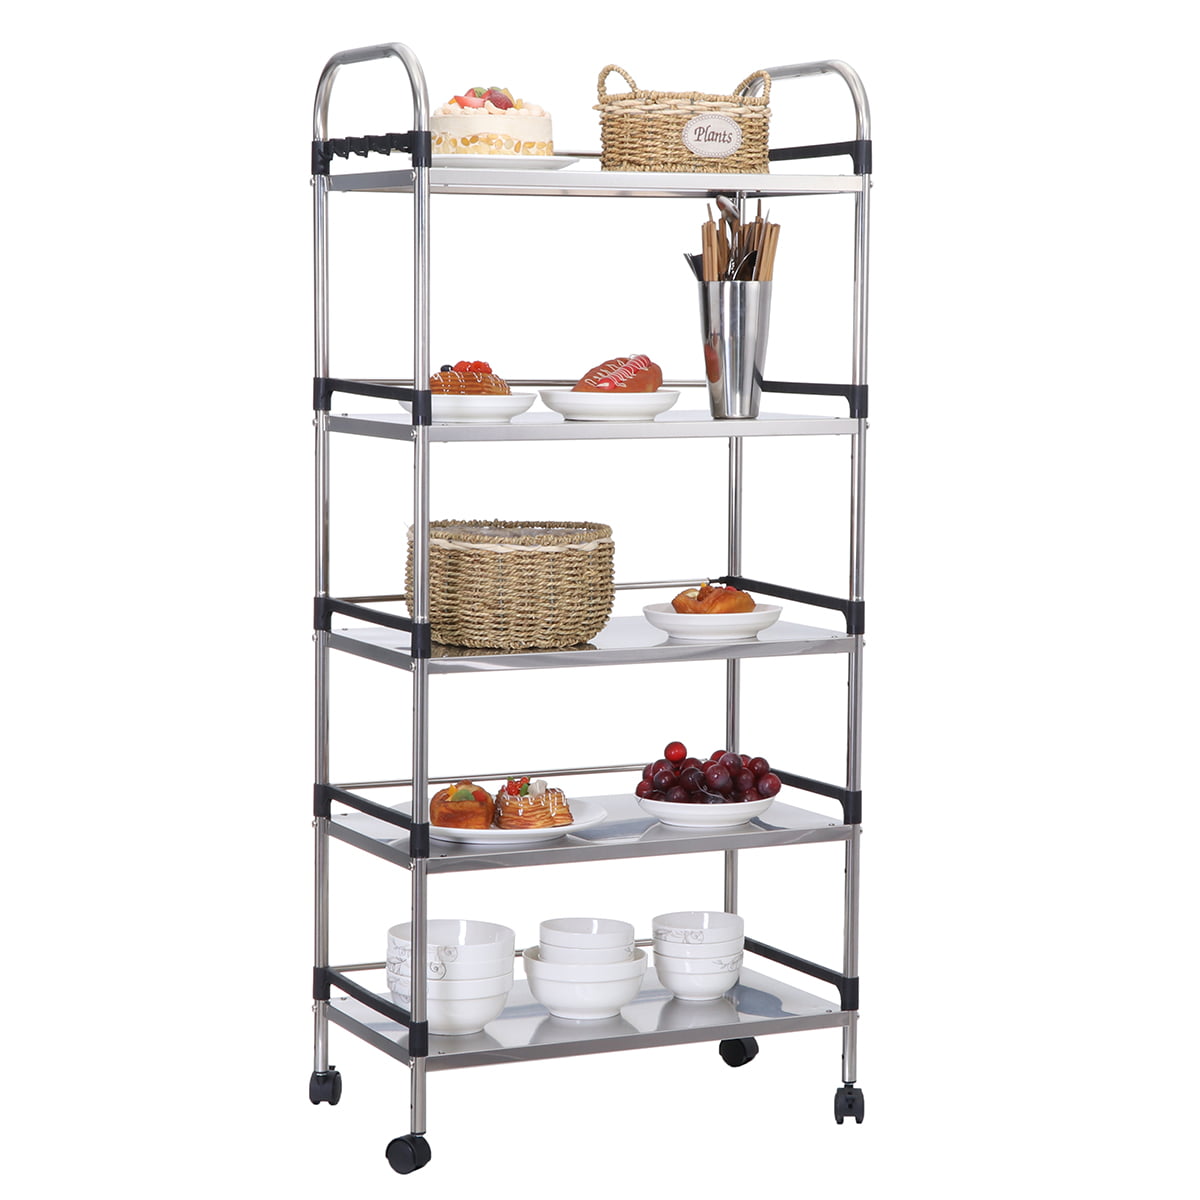 Thicken Stainless 52" H Shelving Unit 5-Tier with Wheels Kitchen Bakers 5 Tier Stainless Steel Rack